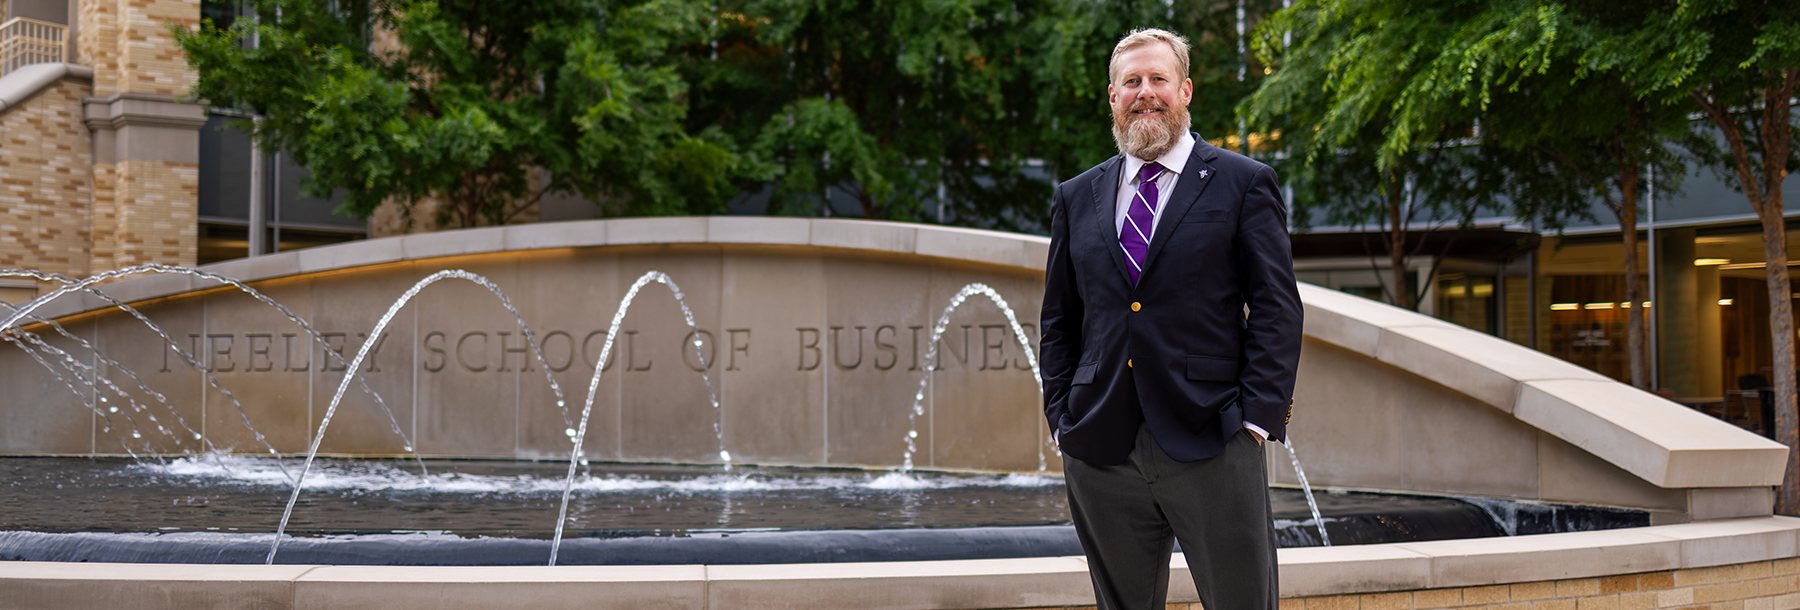 Section Image: Craig Crossland in front of the Neeley Fountain 